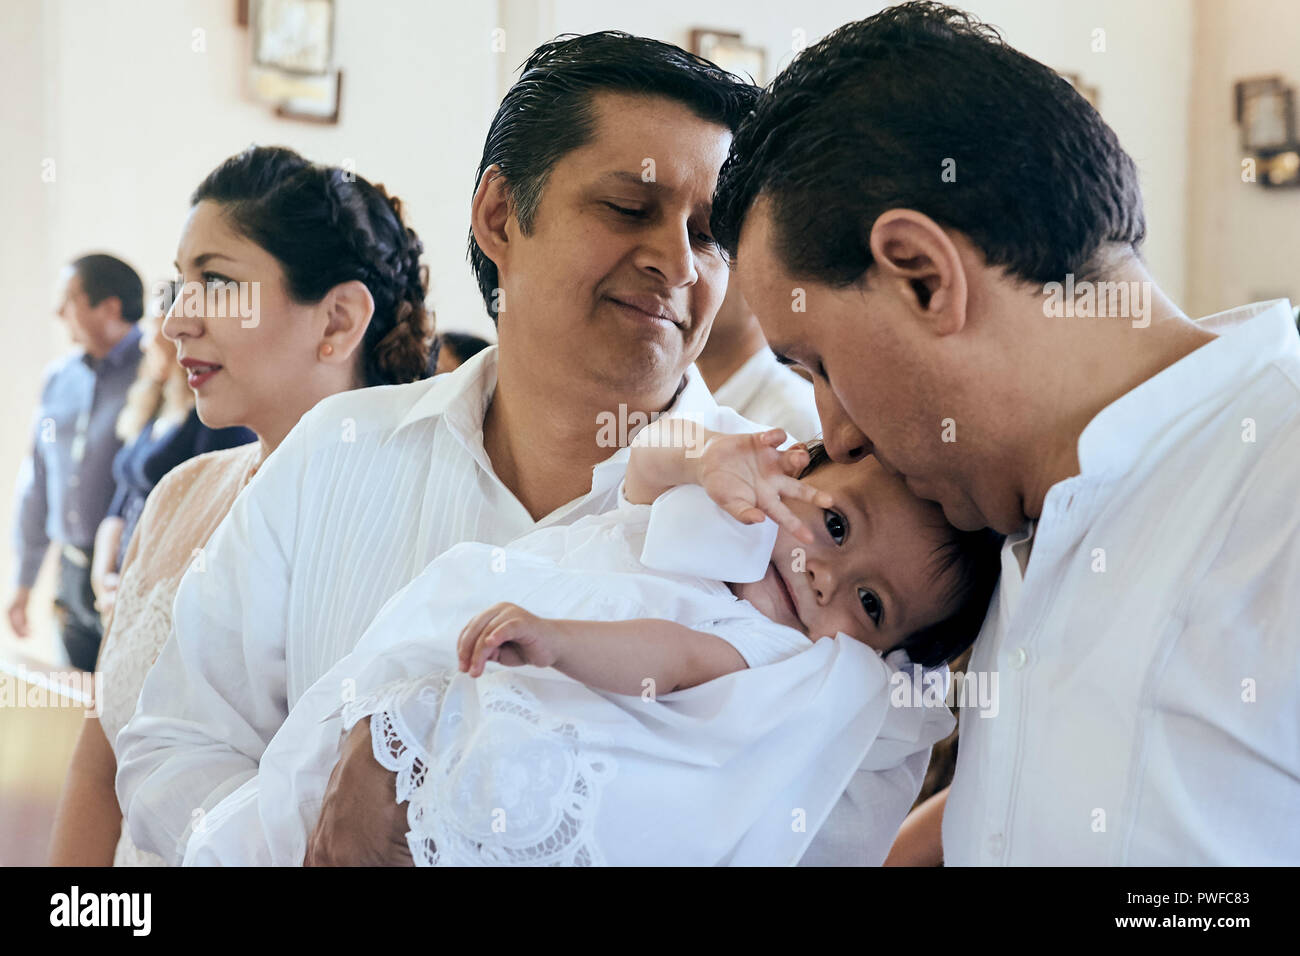 MERIDA,YUC/MEXICO - NOV 18, 2017: Godfather holds goddaughter during baptism ceremony at catholic church. Father kisses his baby girl. Stock Photo